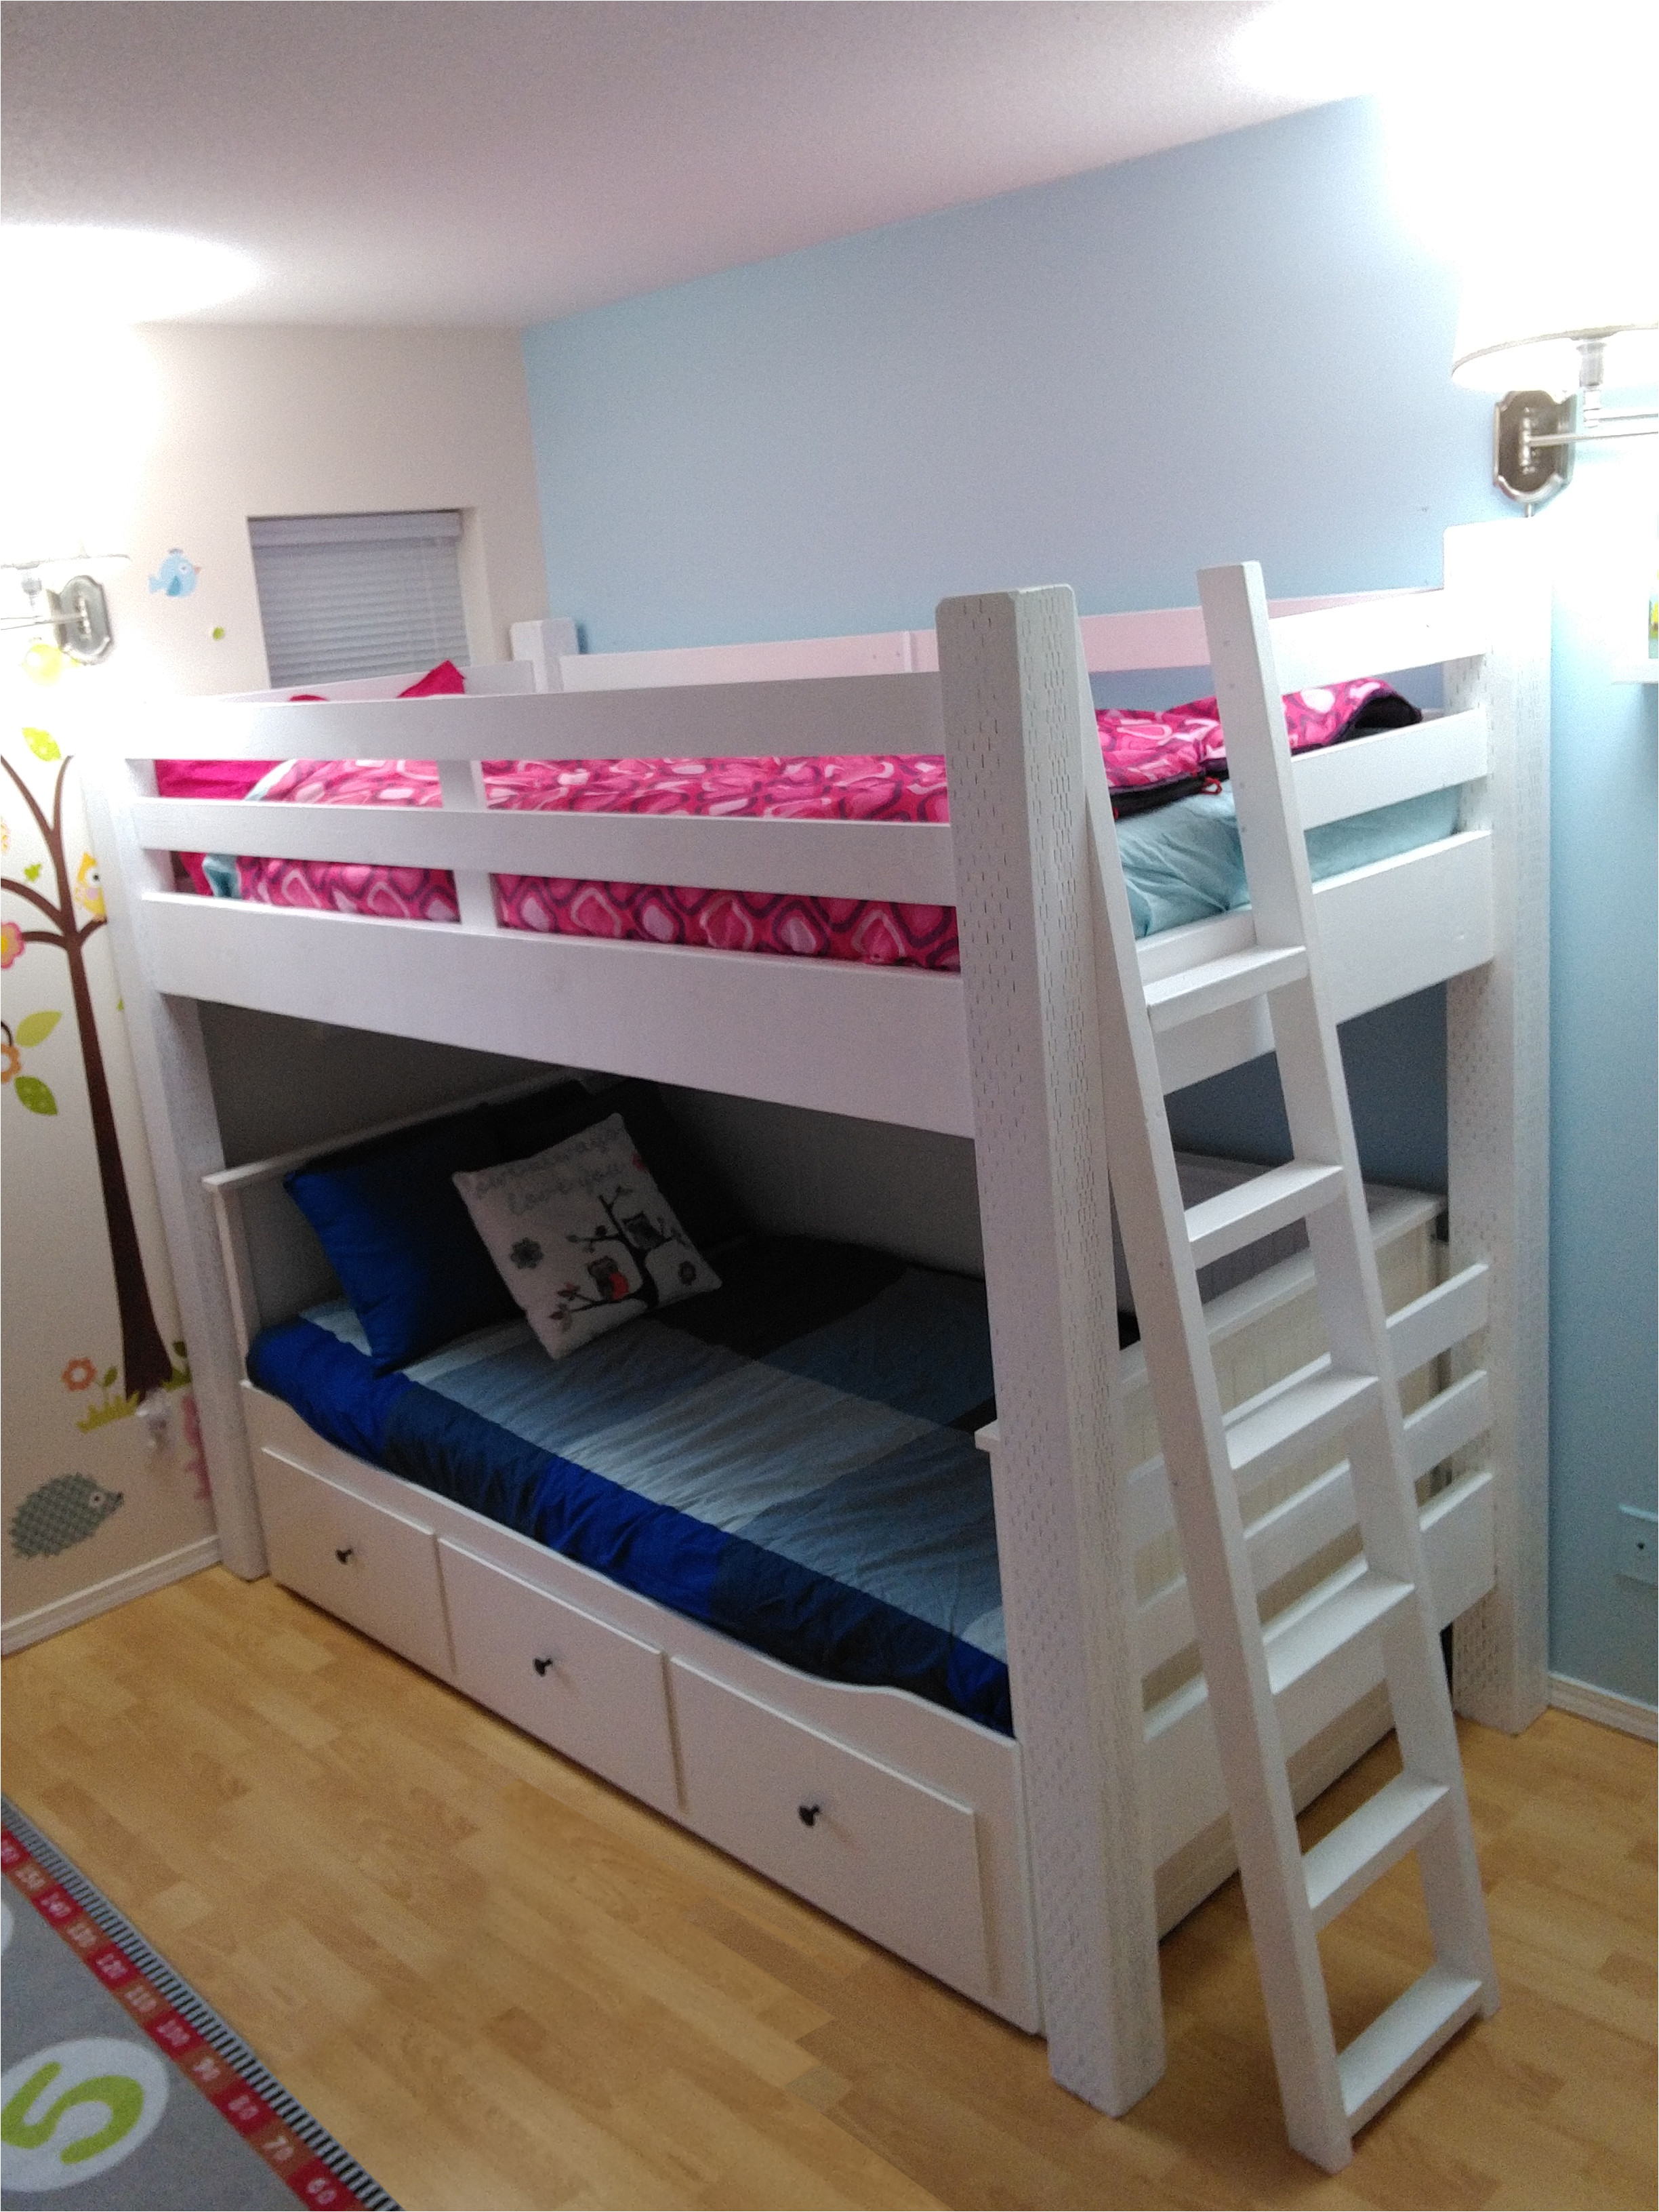 built to wrap the ikea hemnes daybed